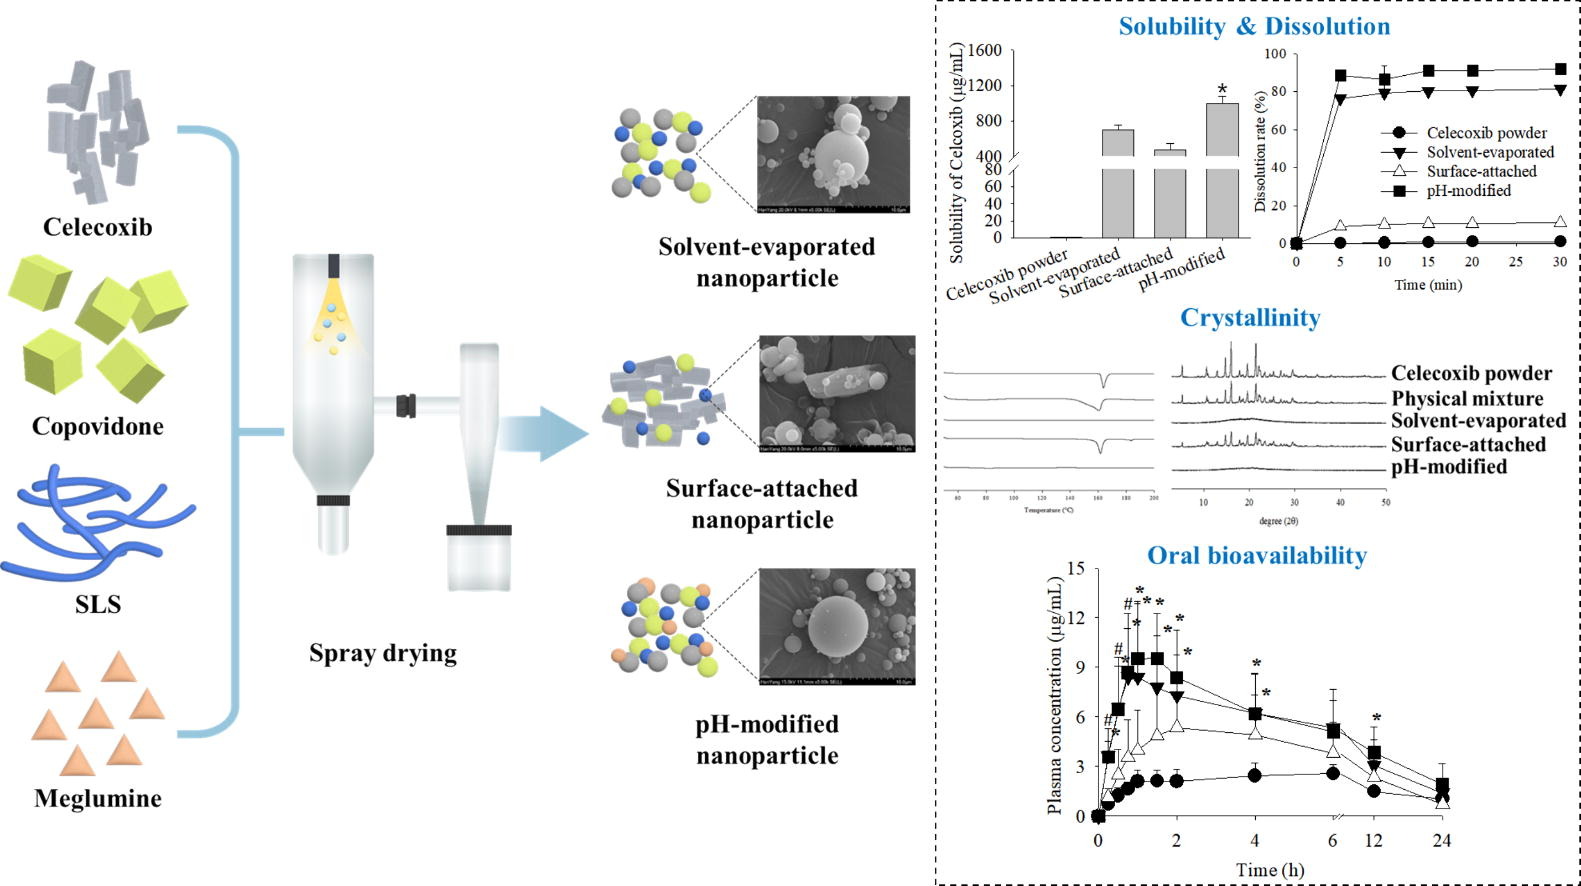 Modification of microenvironmental pH of nanoparticles for enhanced solubility and oral bioavailability of poorly water-soluble celecoxib